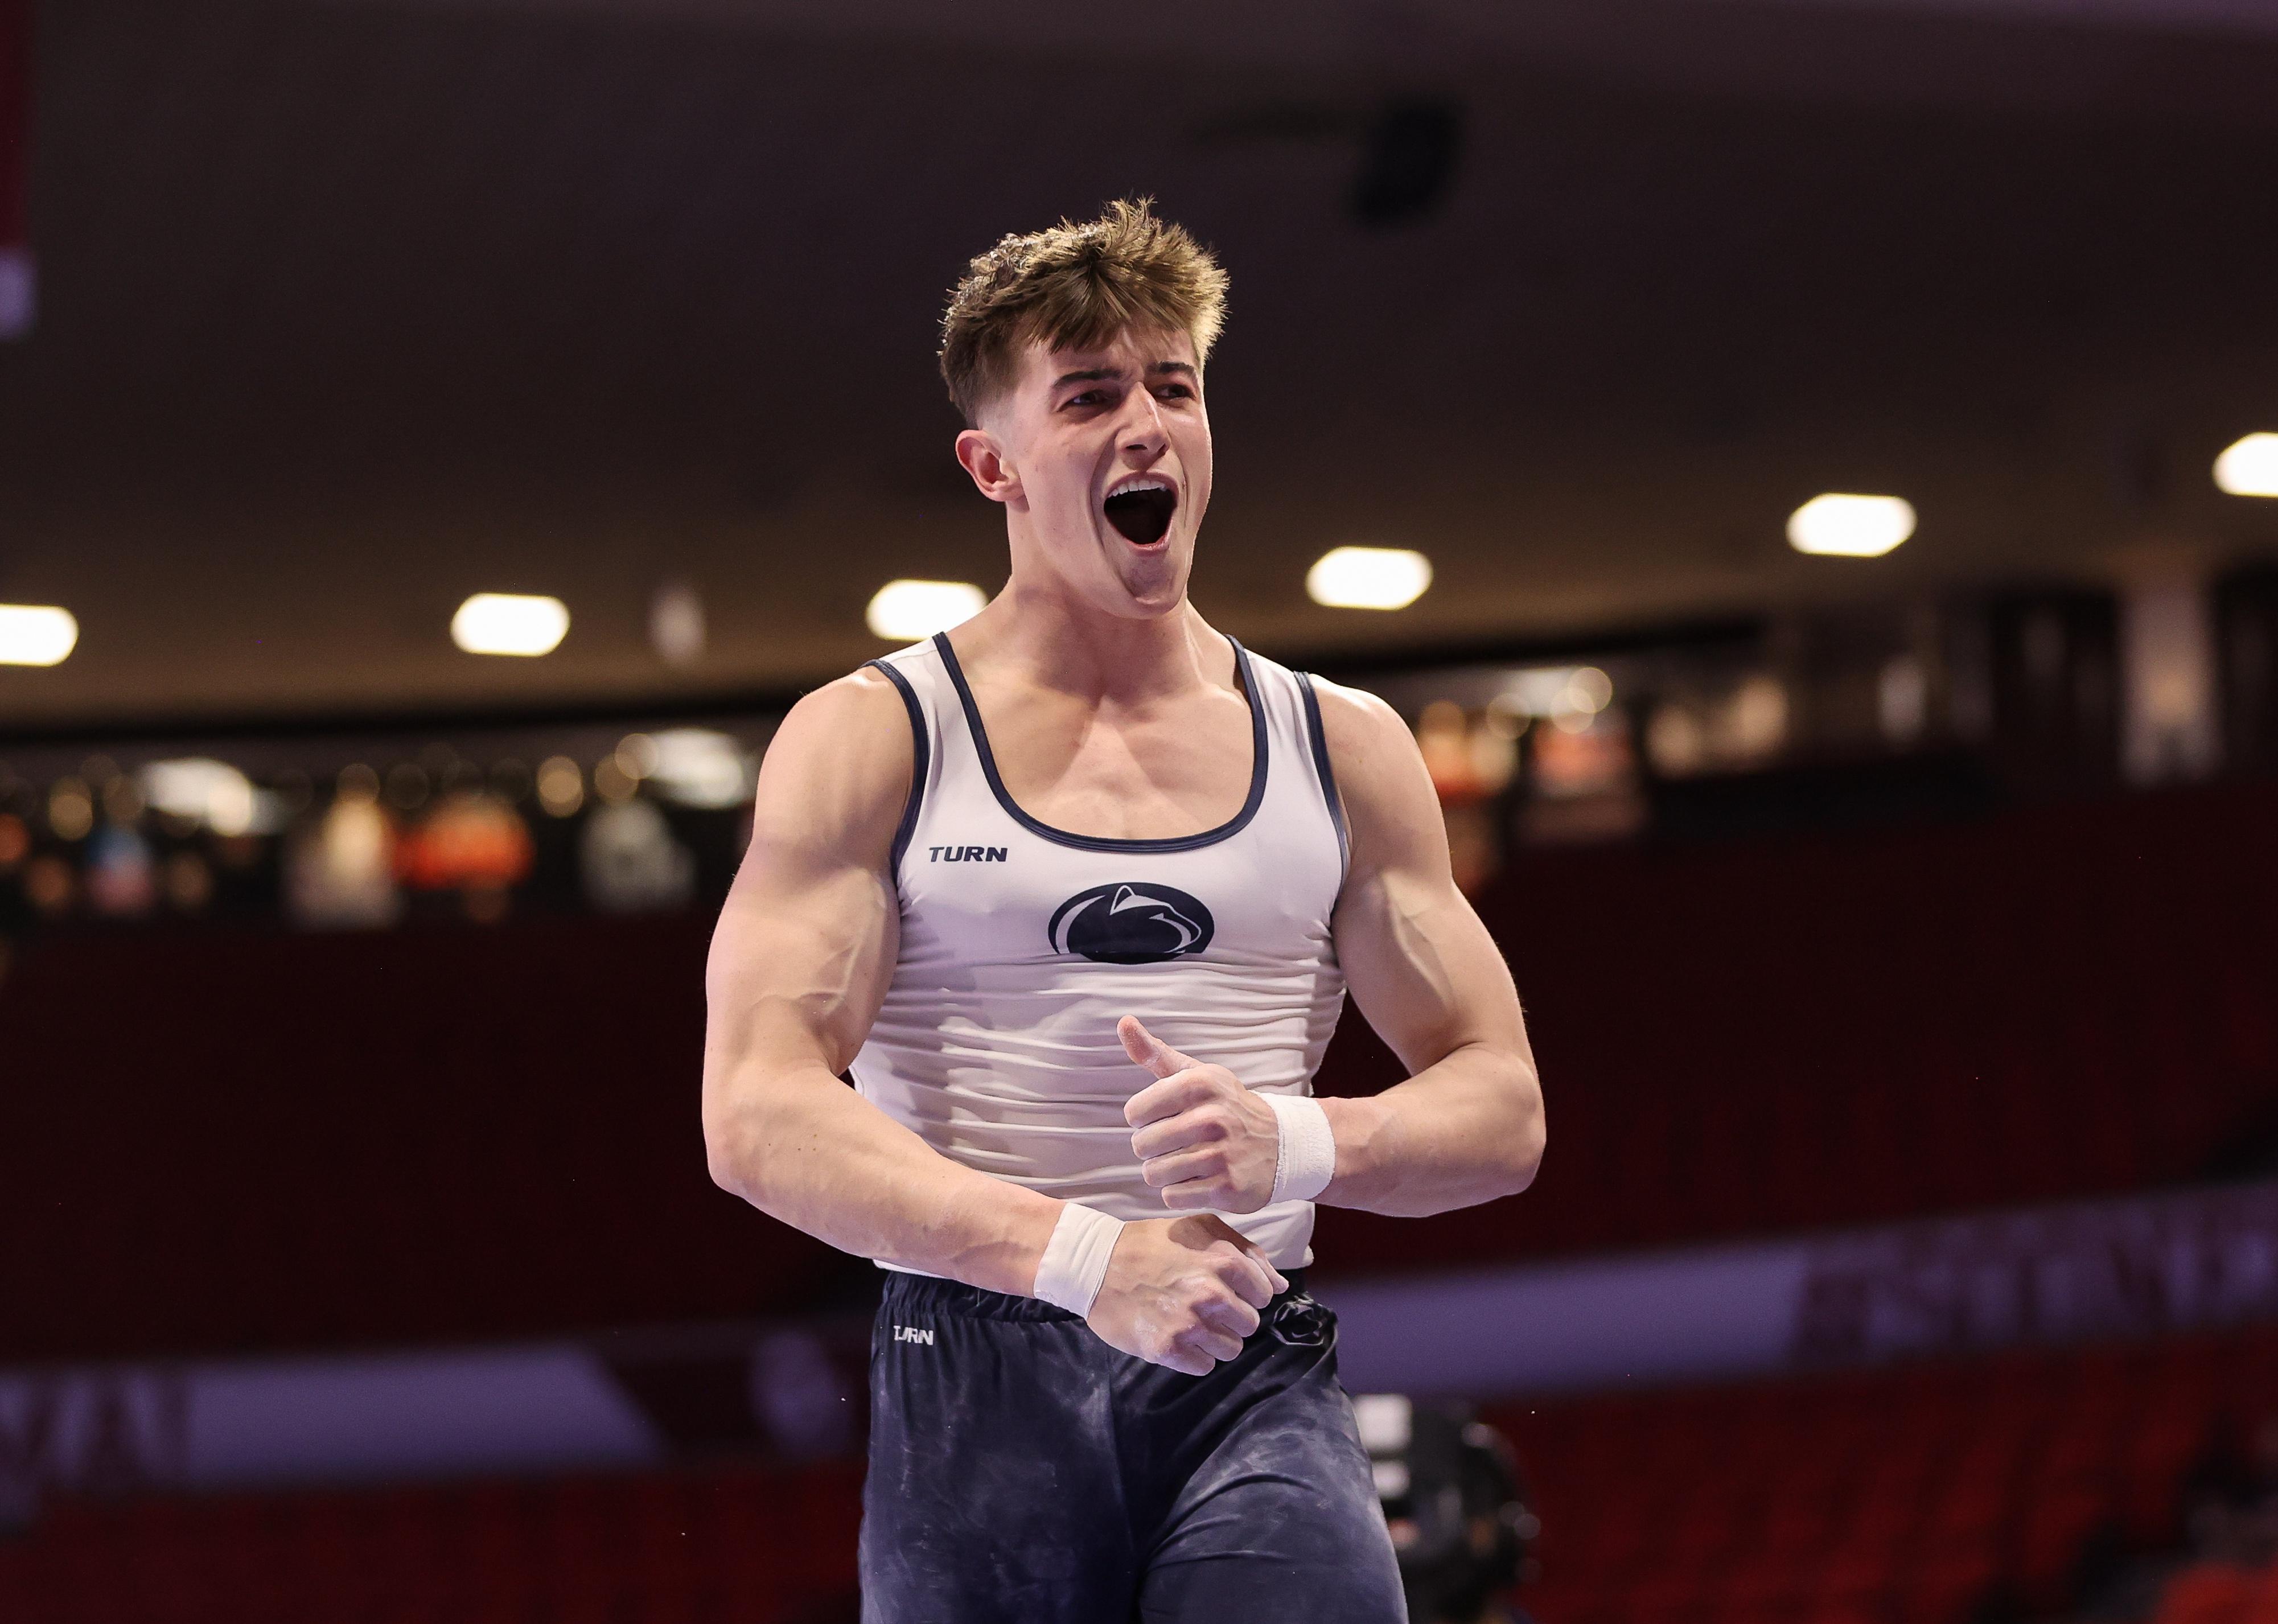 Michael Jaroh of Penn State reacts after competing in parallel bars.